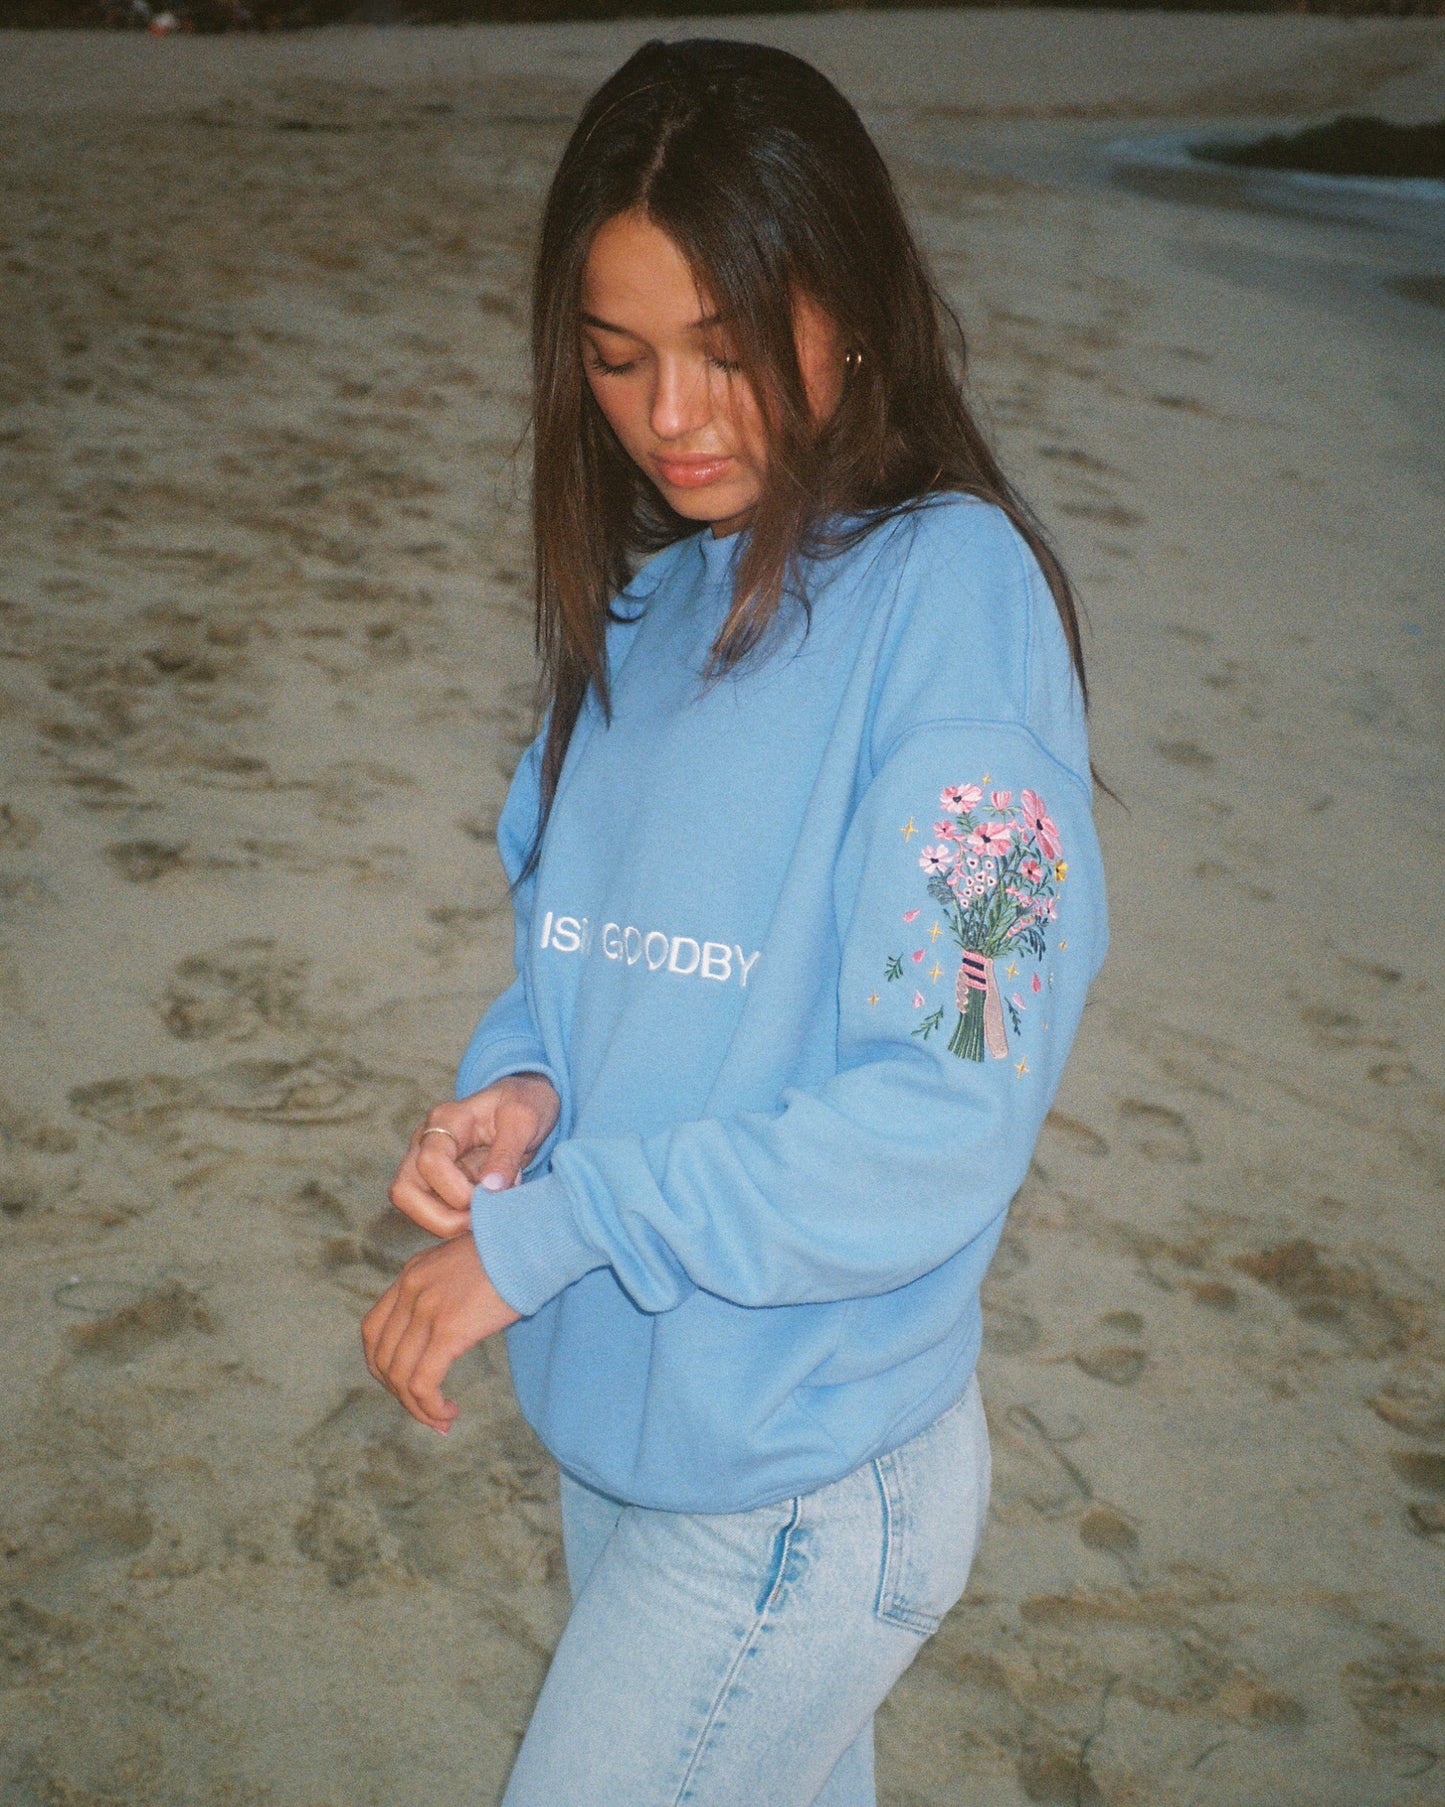 "This Isn't Goodbye" Crew Neck in Blue